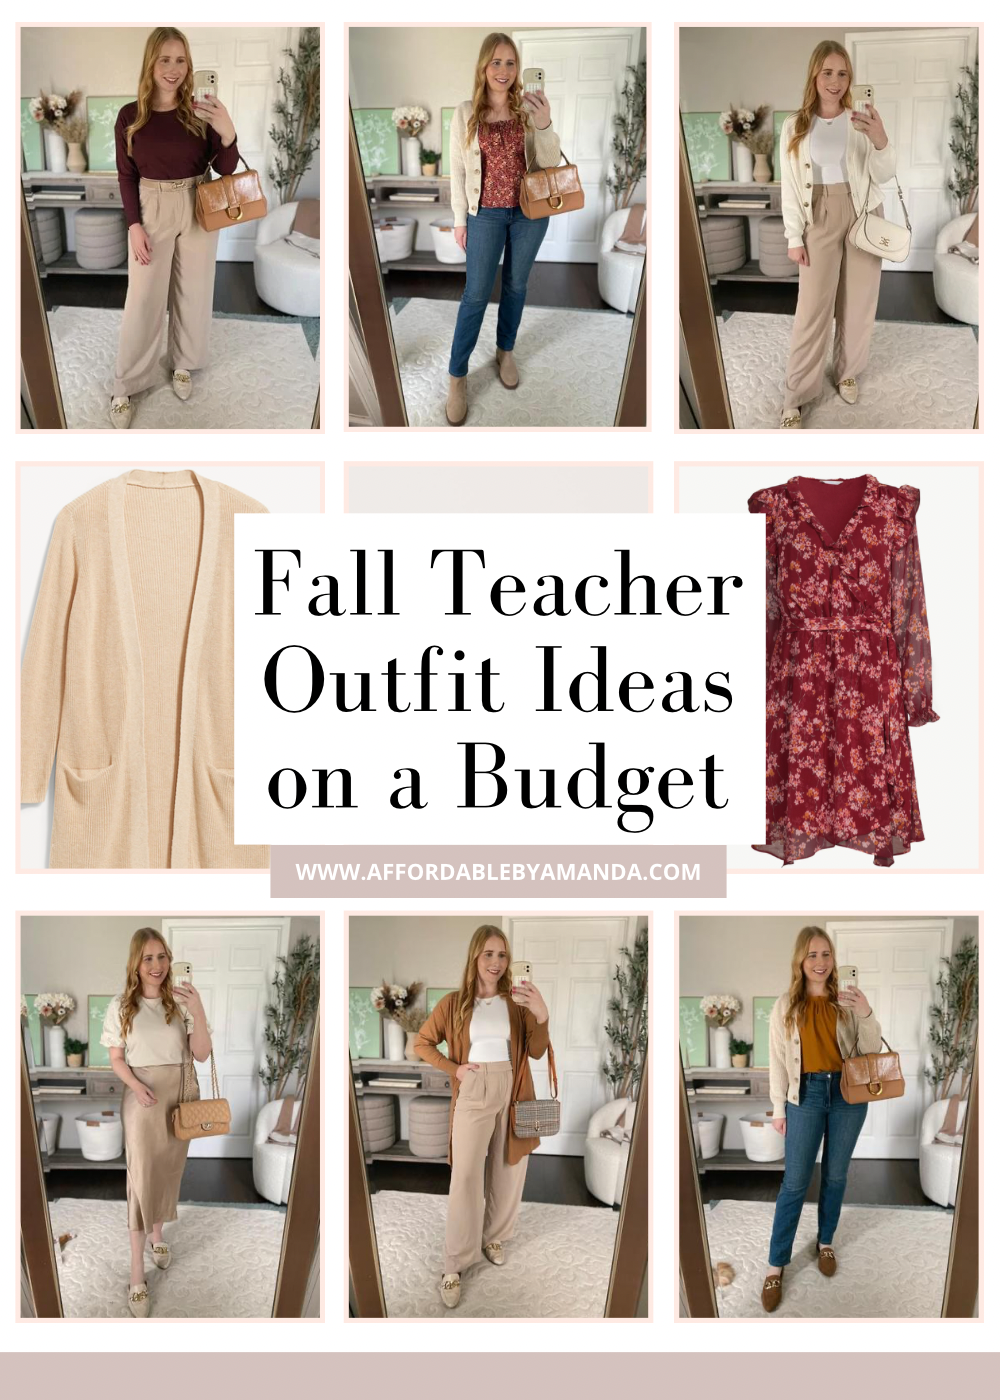 Fall Teacher Outfit Ideas on a Budget - Affordable by Amanda